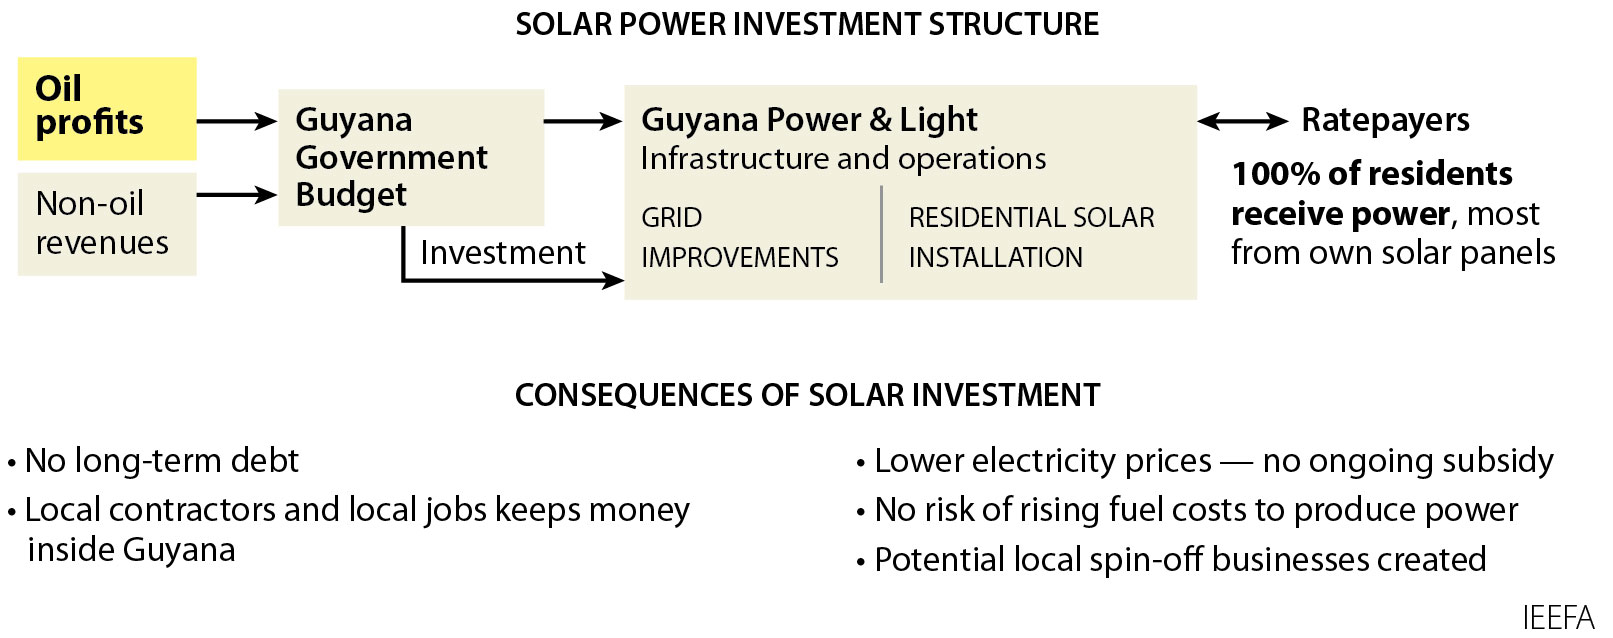 Solar Power Investment Structure